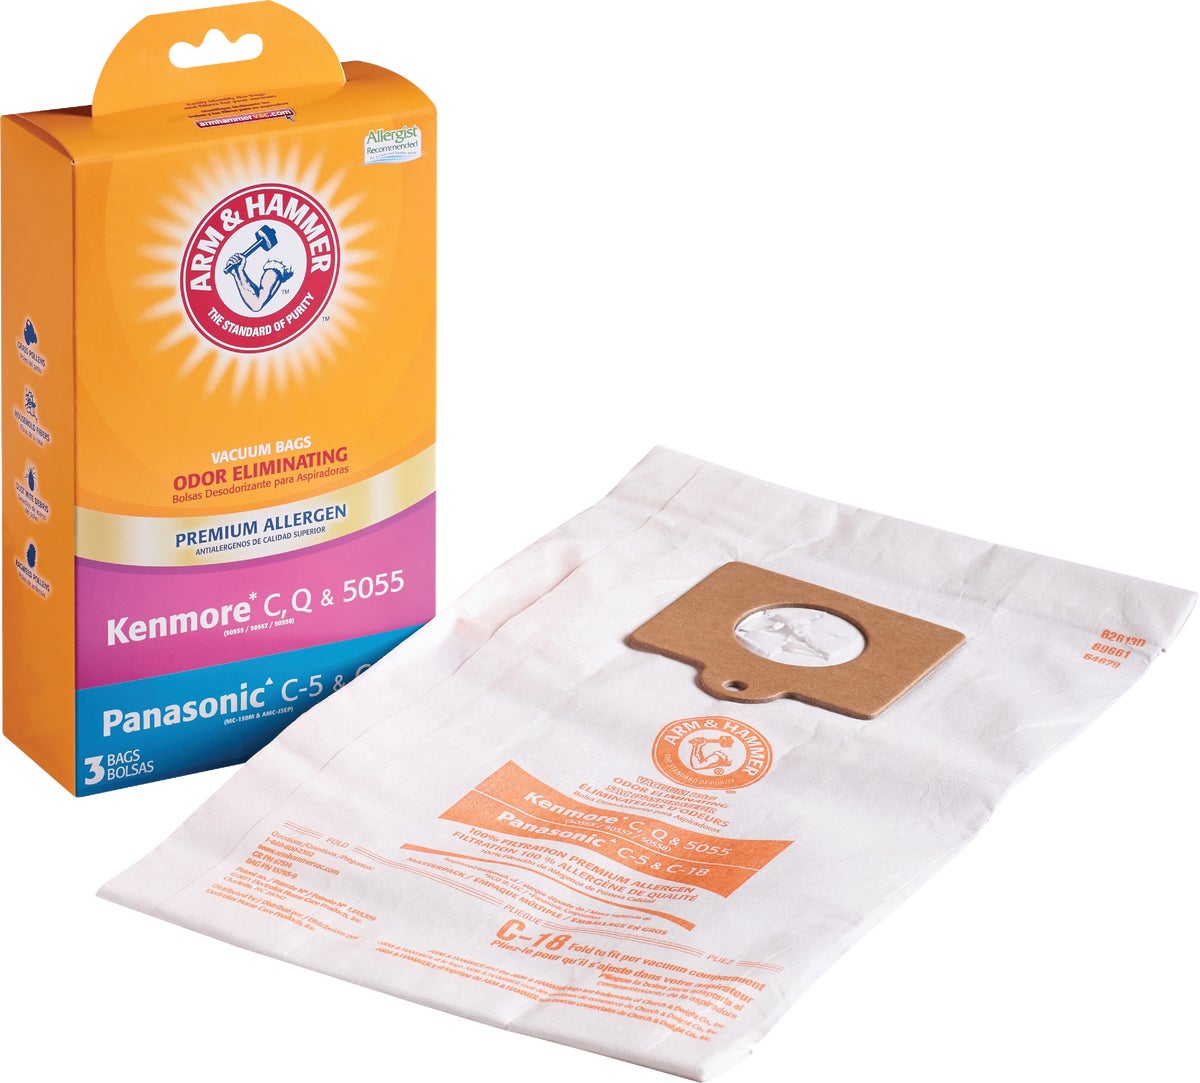 Micro Allergen Pack of 3 Bags12521 F-SHIP 3M Filtrete Eureka MM Sanitaire MM 